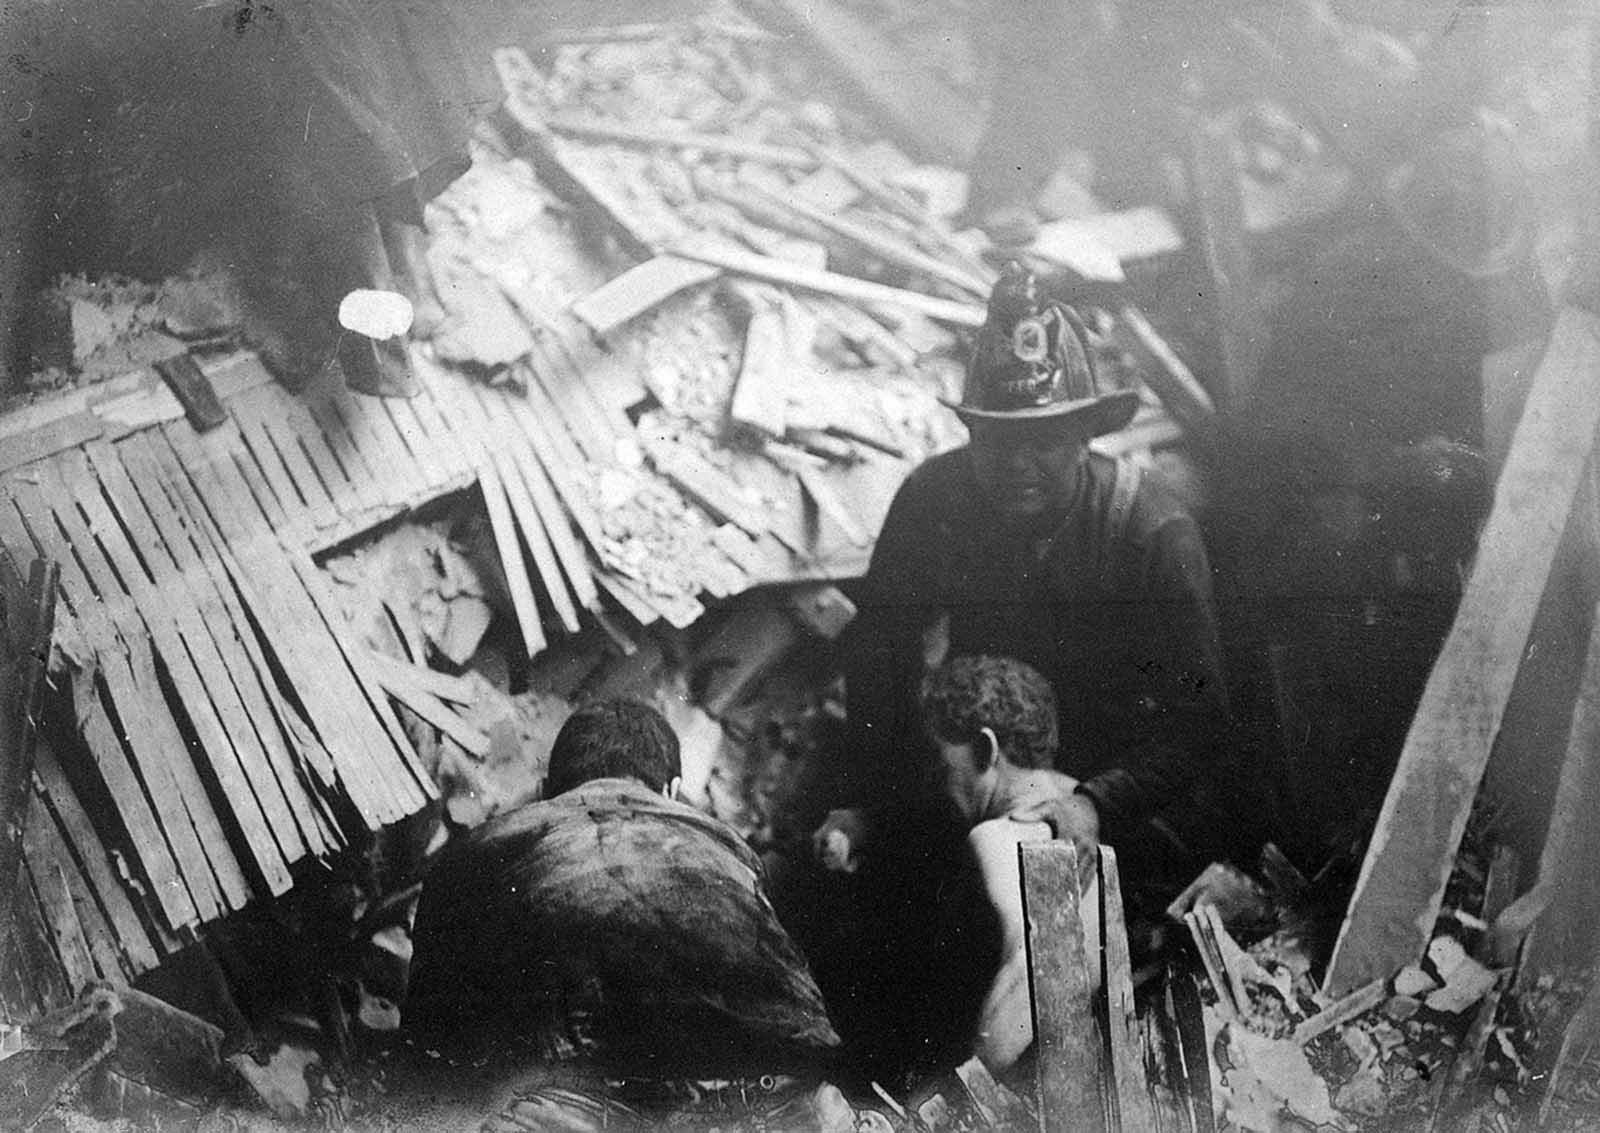 Rescue workers helping survivors in the wreckage.